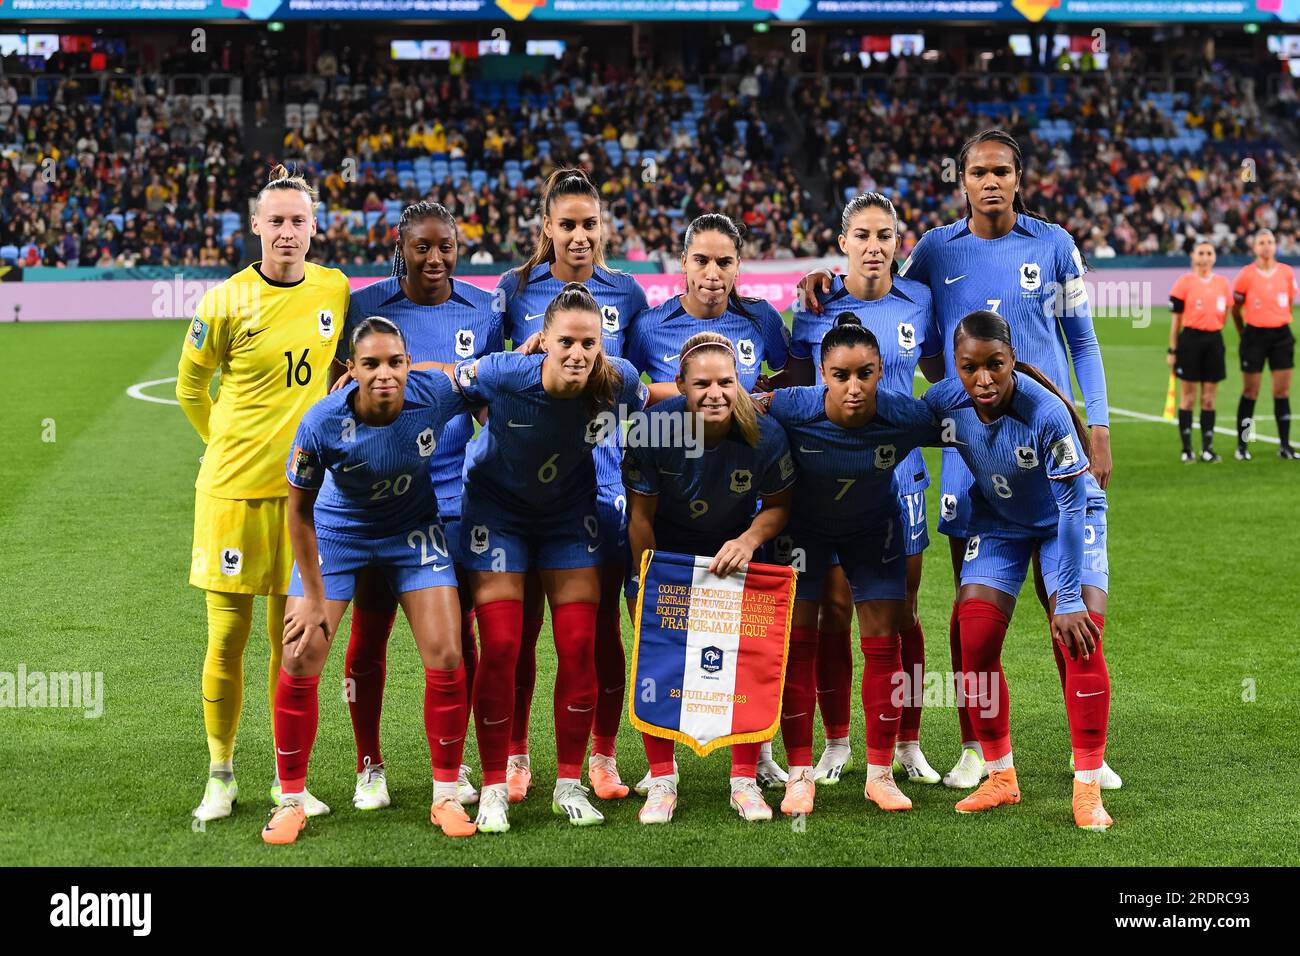 Sydney, Australia, 23 July, 2023. France poses for a team photo during the Women's World Cup football match between France and Jamaica at Allianz Stadium on July 23, 2023 in Sydney, Australia. Credit: Steven Markham/Speed Media/Alamy Live News Stock Photo